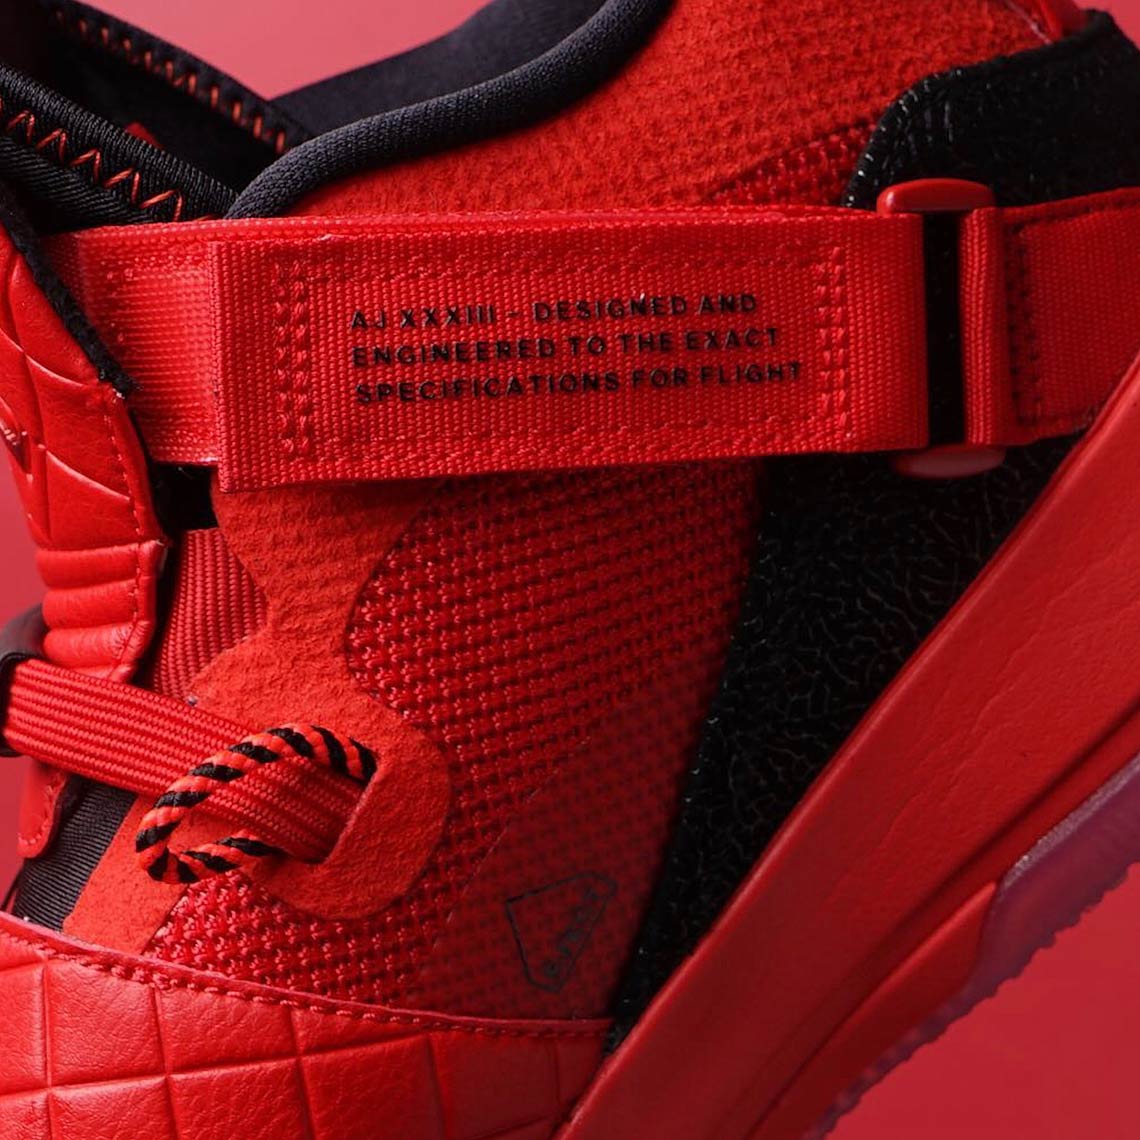 how to identify fake jordan With 5s Red Aq8830 600 8